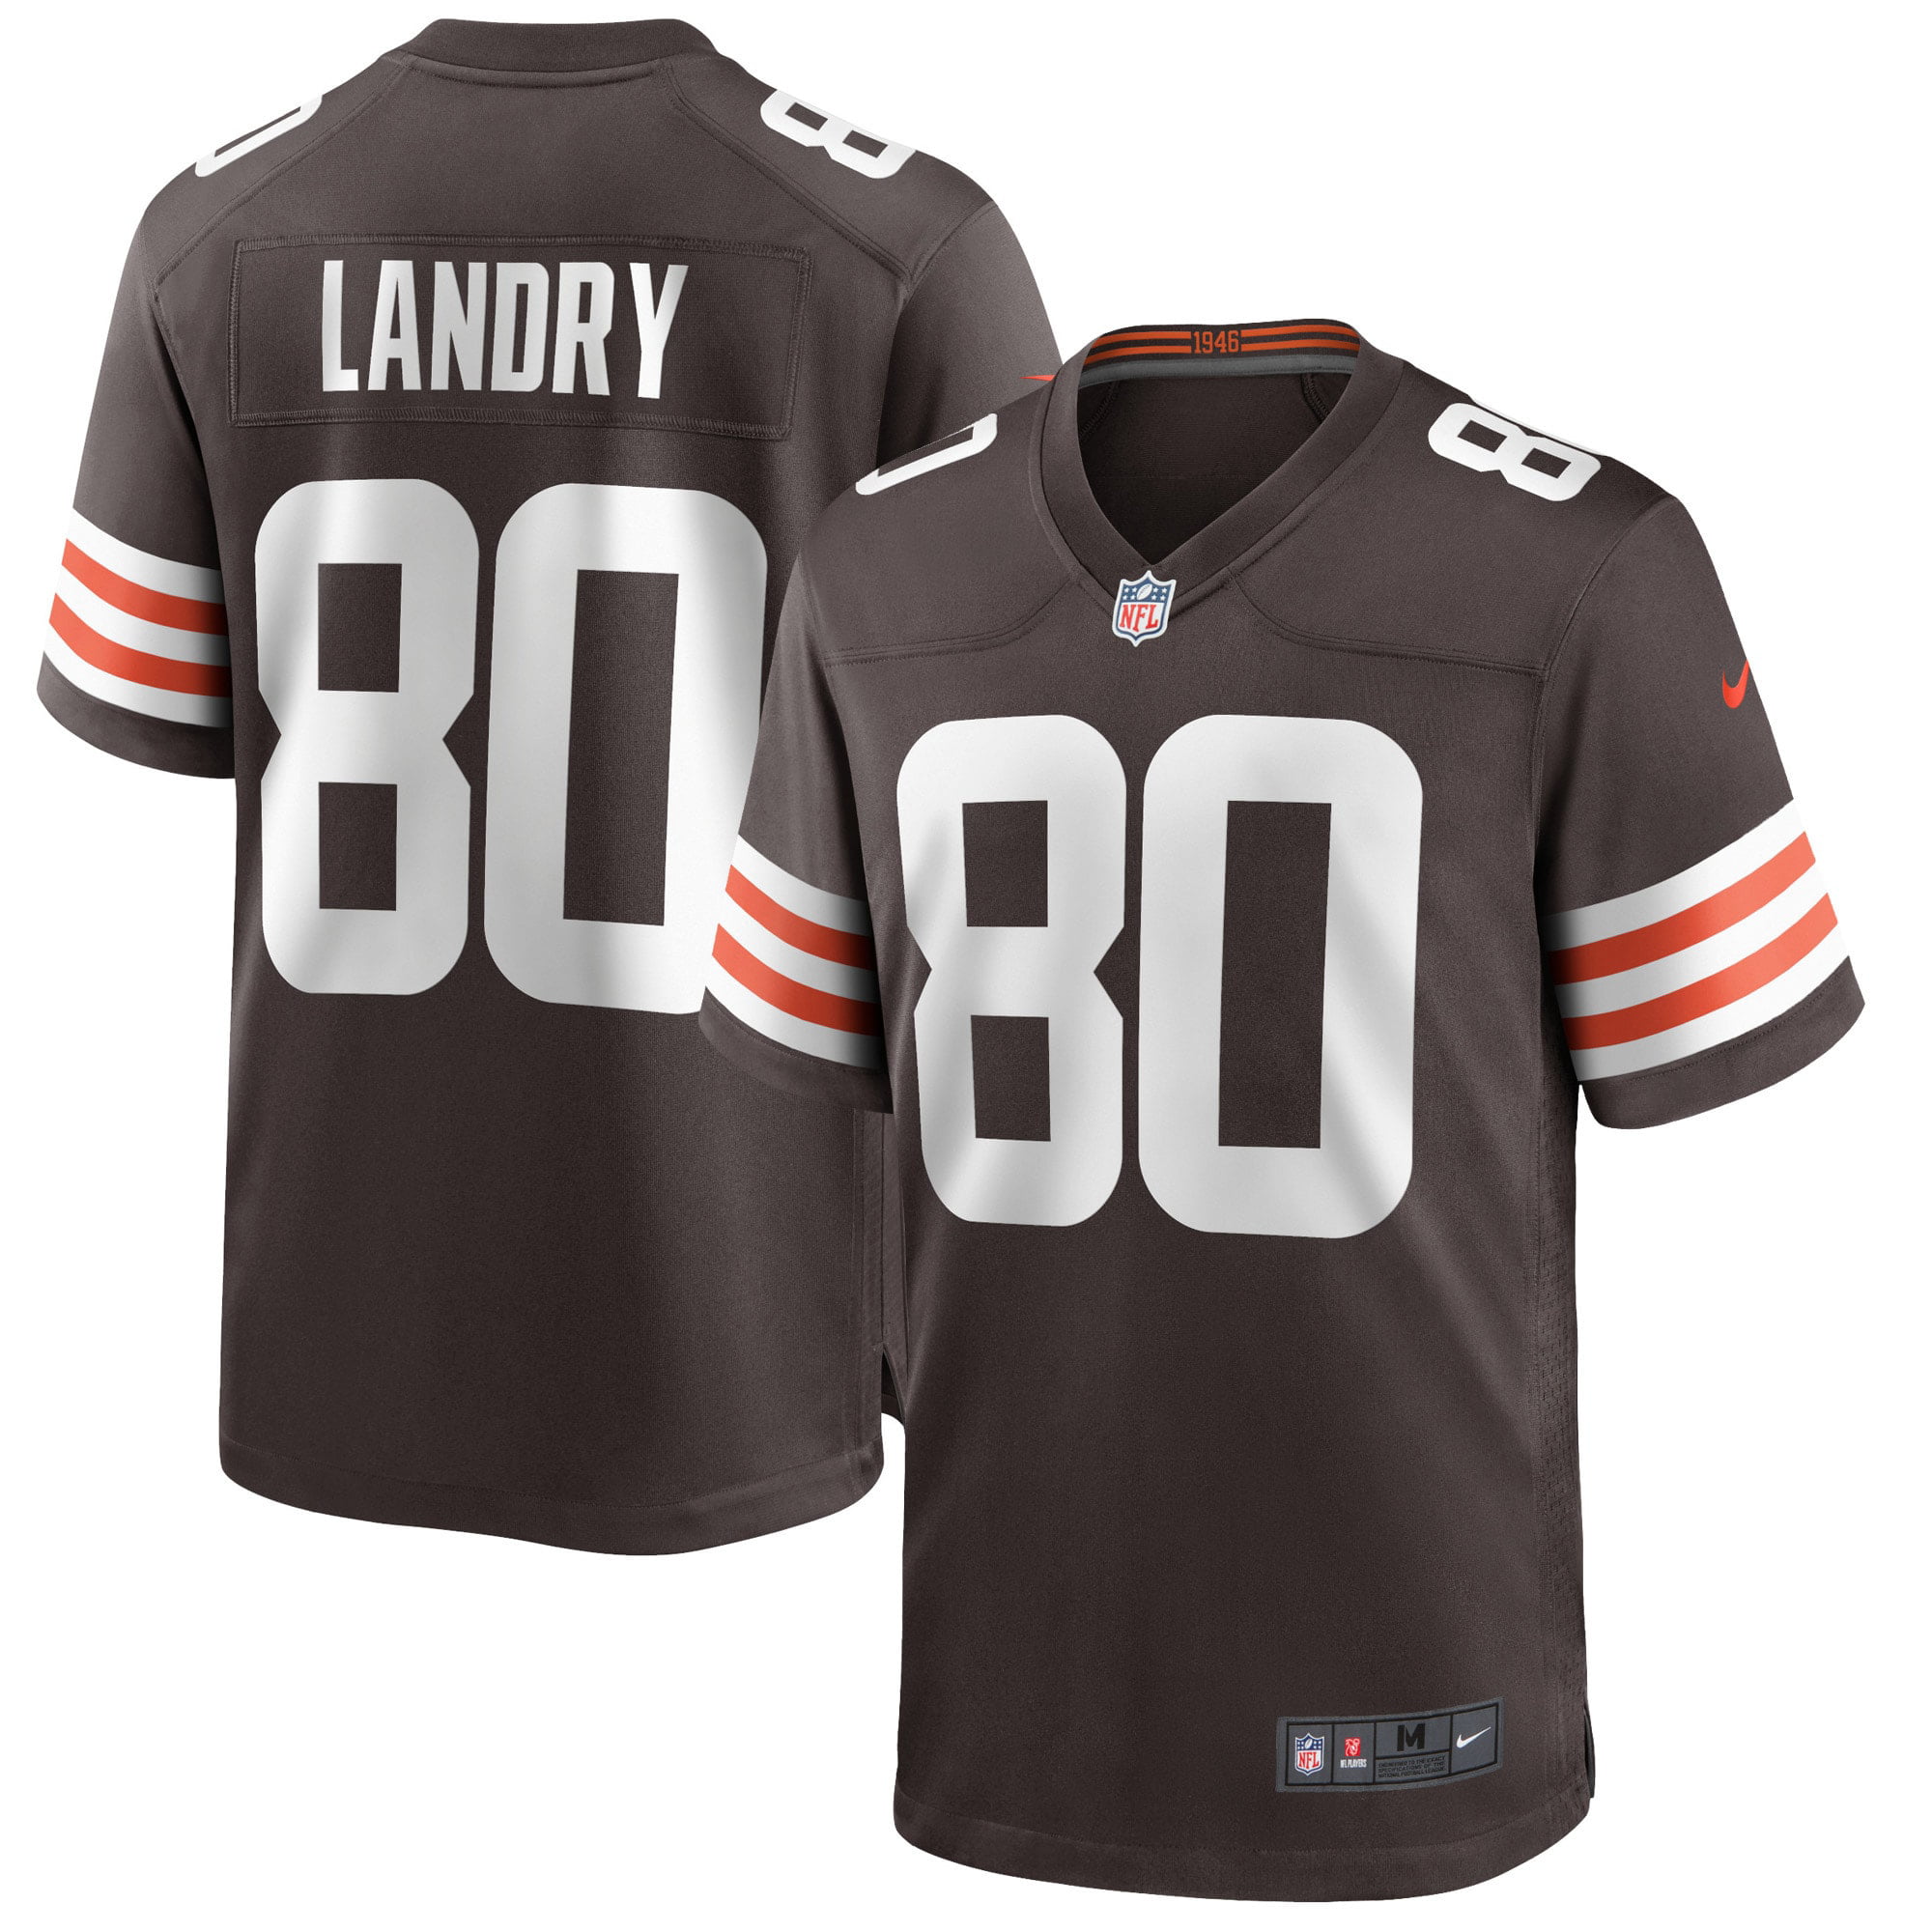 Jarvis Landry Cleveland Browns Nike Game Player Jersey - Brown ...